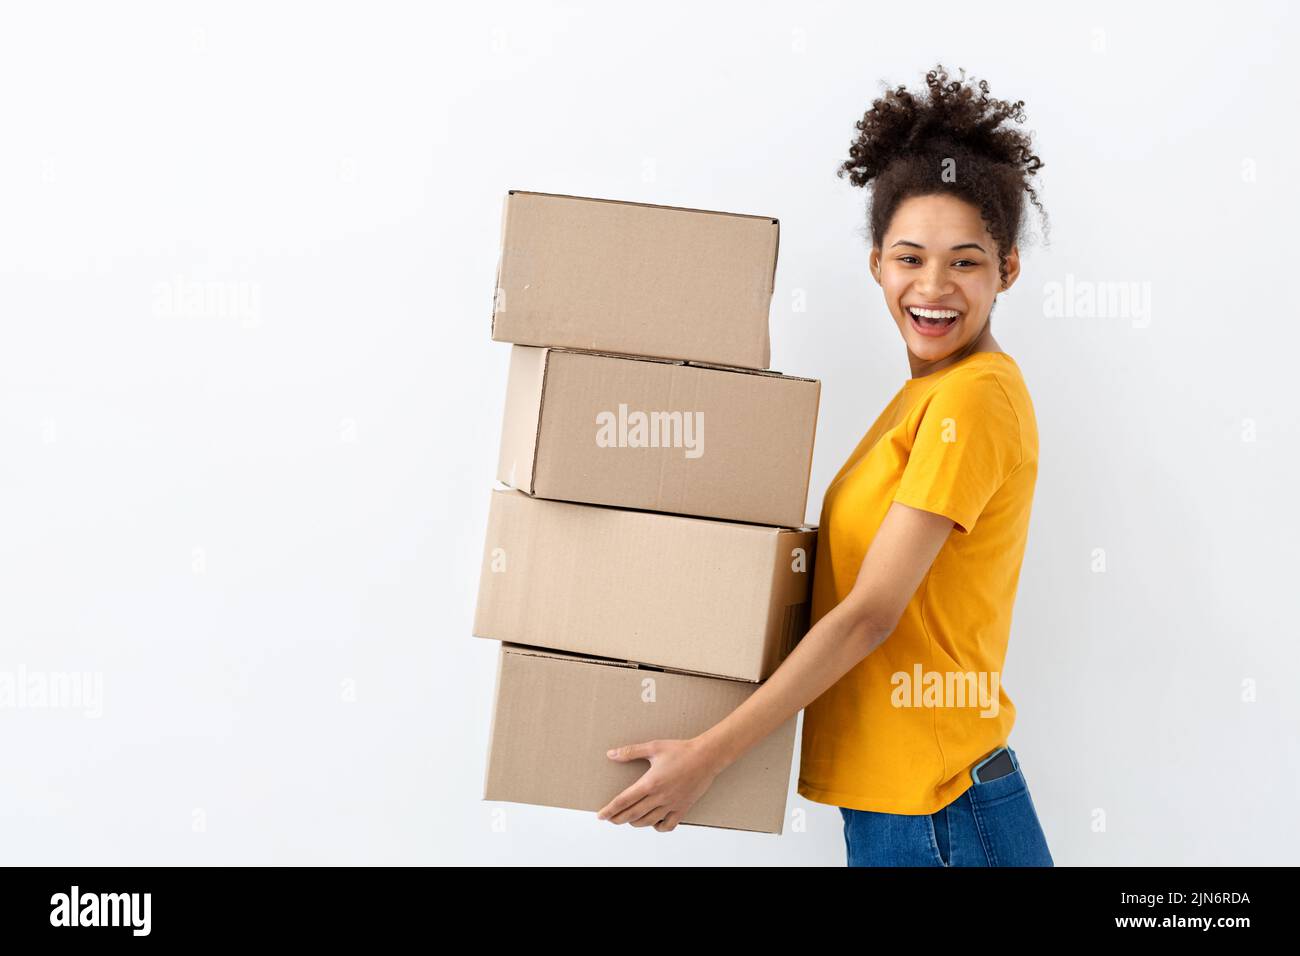 Young happy African American woman with stack of cardboard boxes on white background Copy space Stock Photo